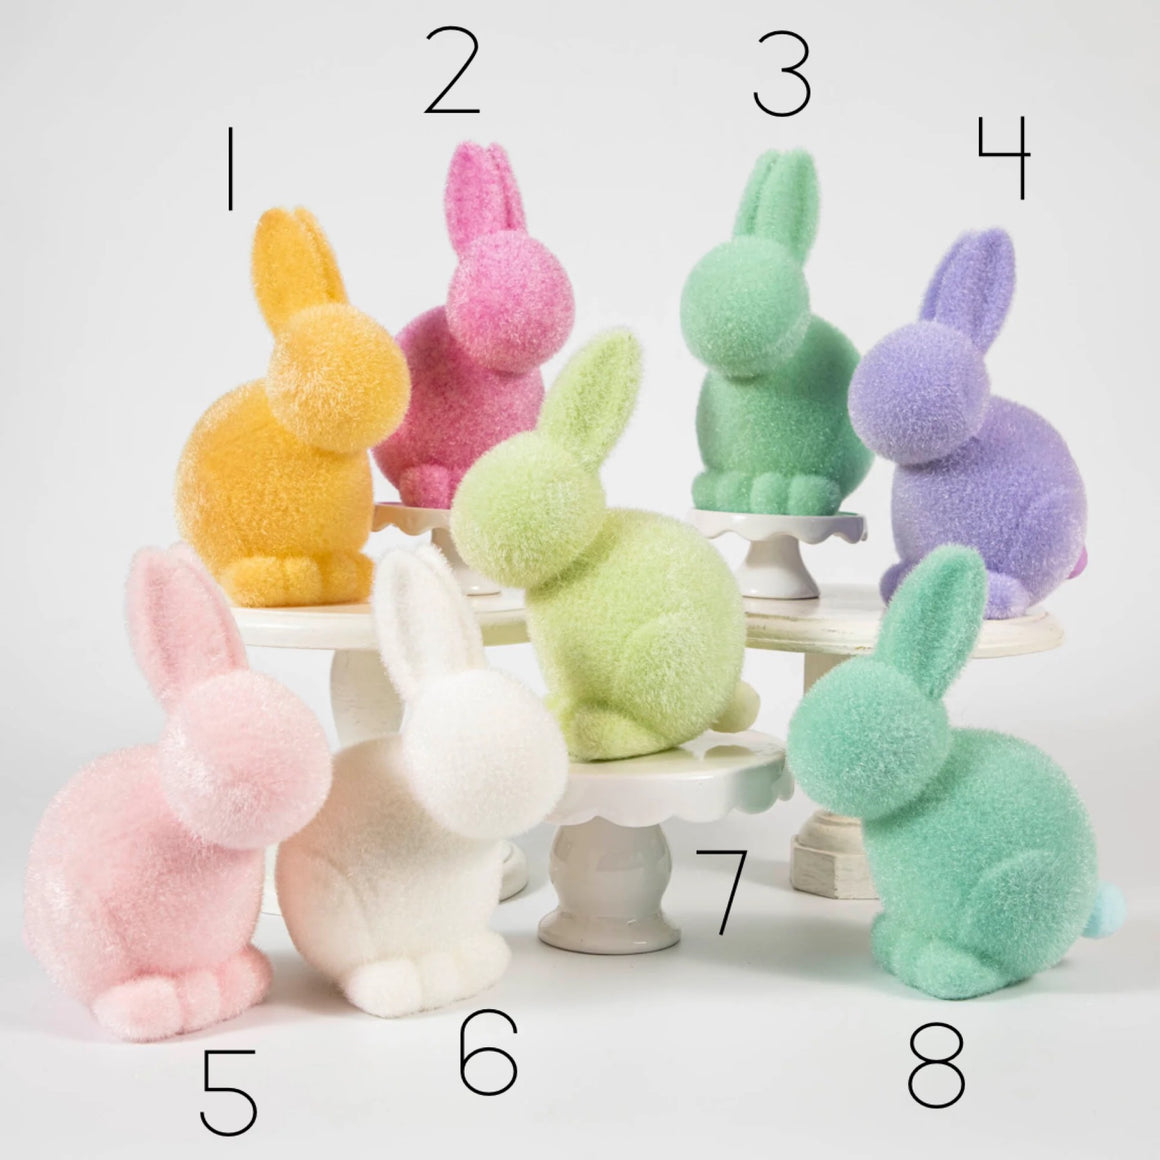 FLOCKED BUNNY - MEDIUM SEATED WITH TAIL